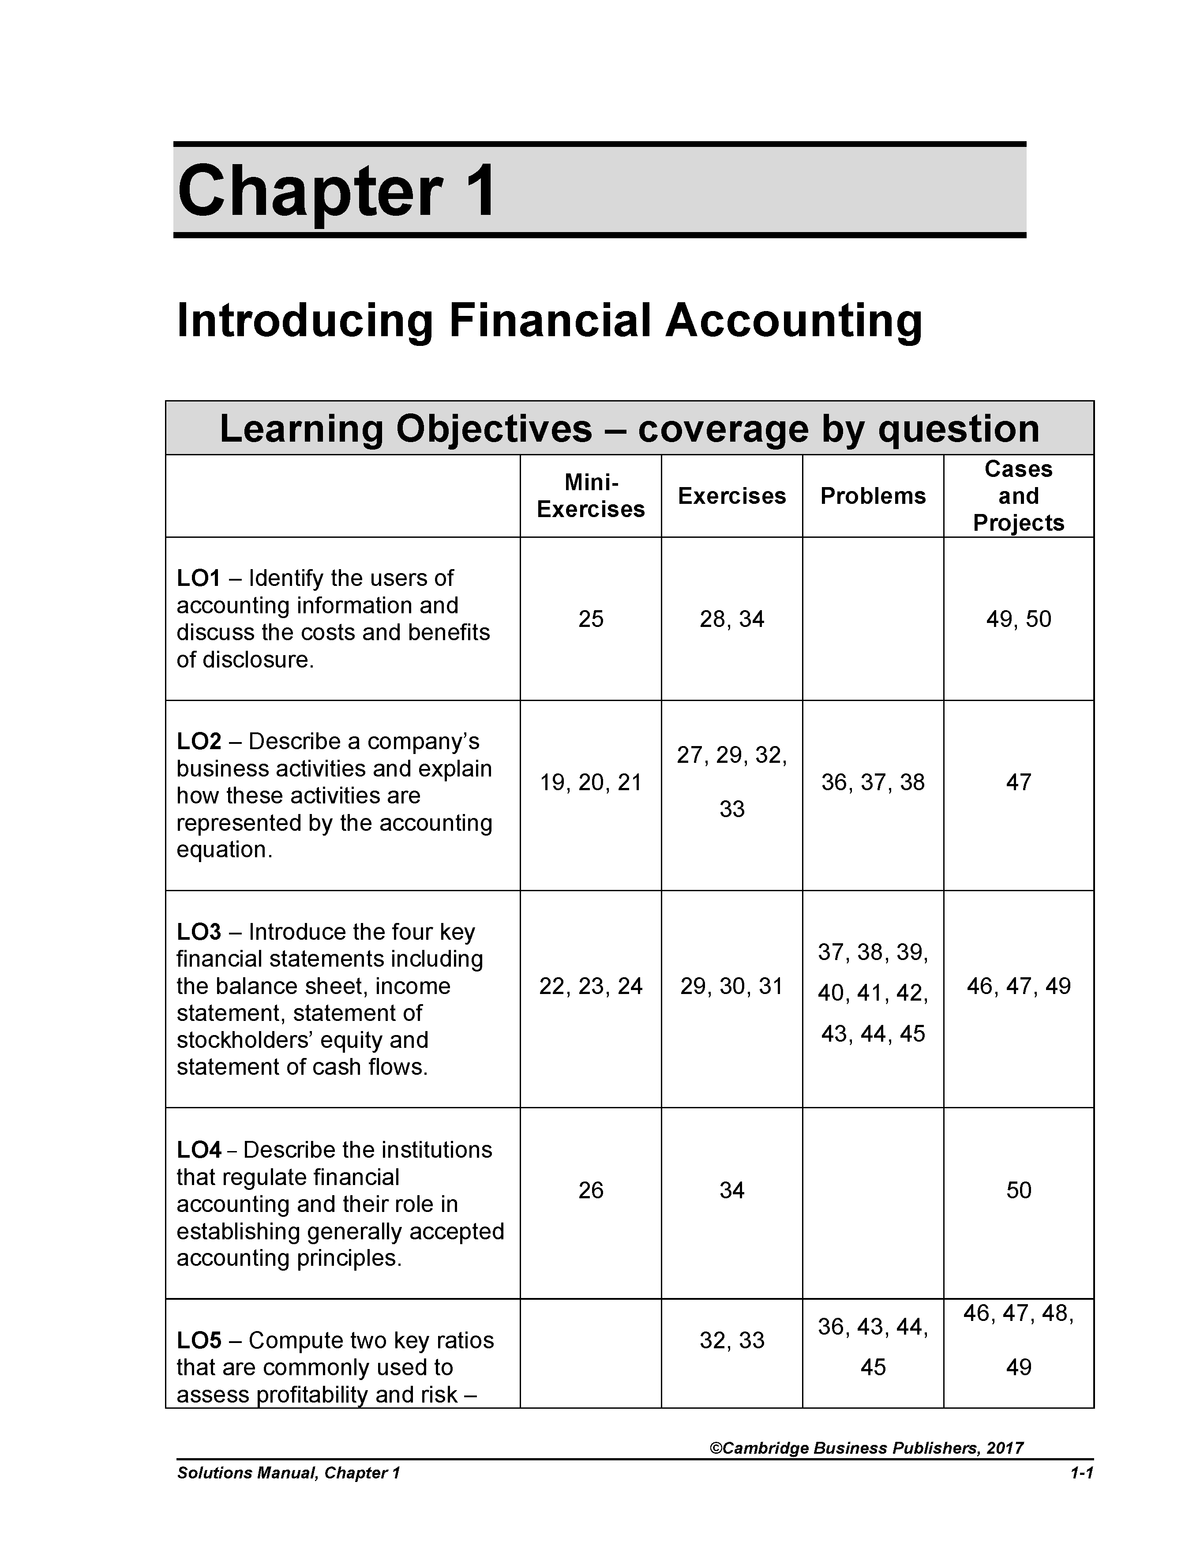 Solutions Manual 5E Introduction To Financial Accounting